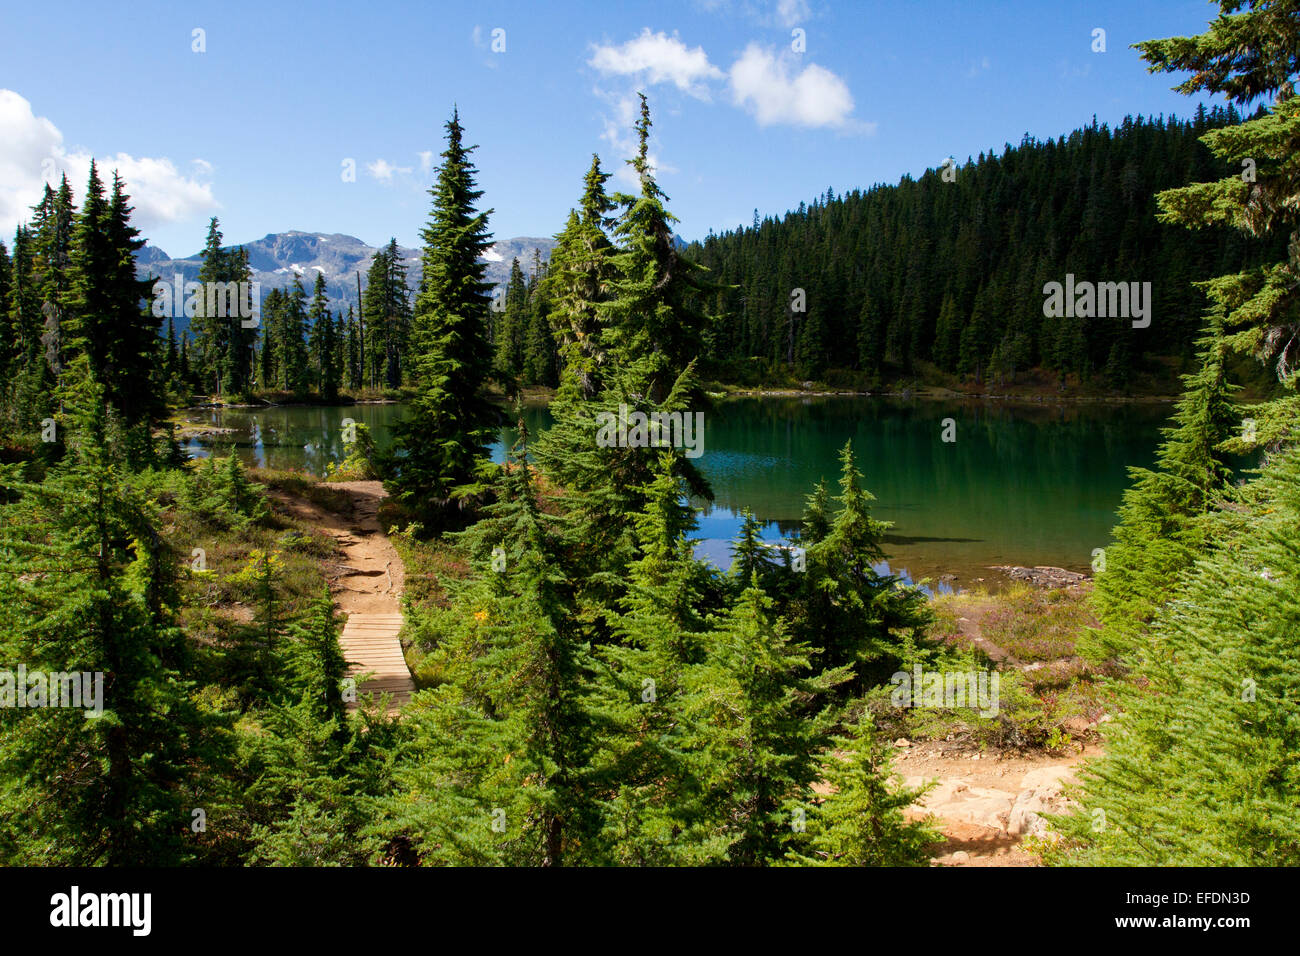 Kwai Lake at the Forbidden Plateau, Strathcona Park, Vancouver Island, BC, Canada in September Stock Photo